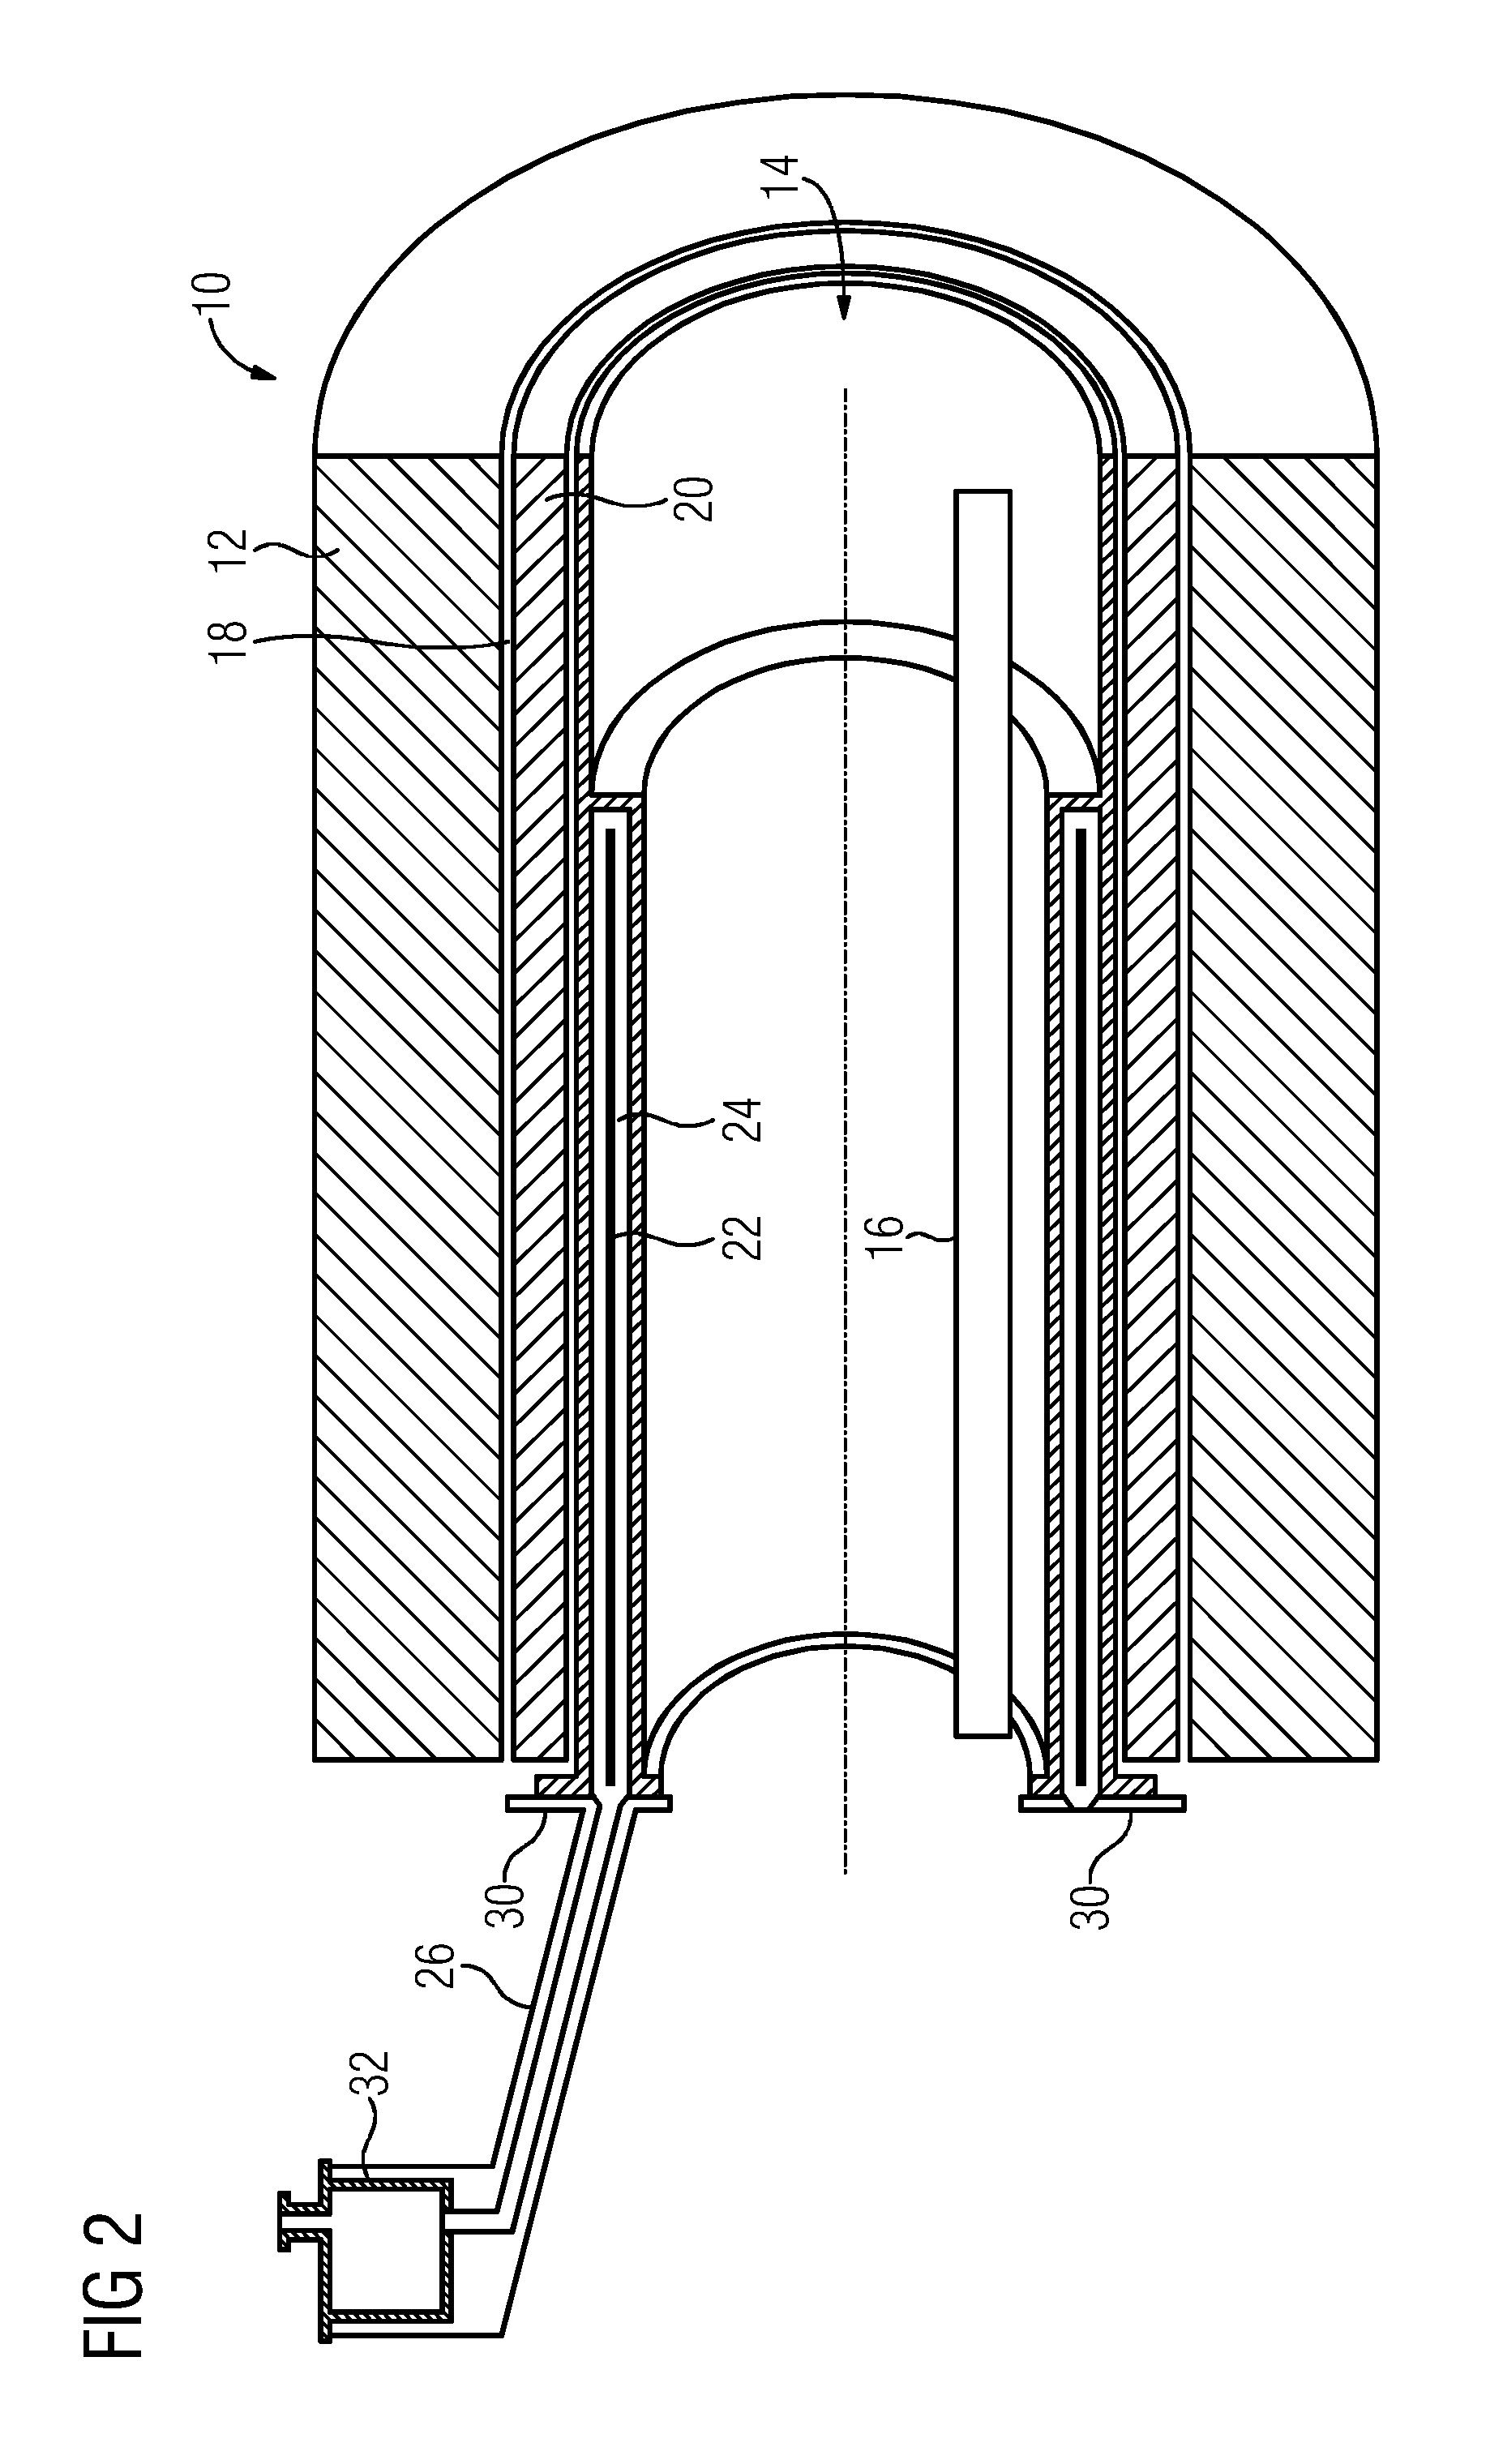 Coil System for a Magnetic Resonance Tomography System